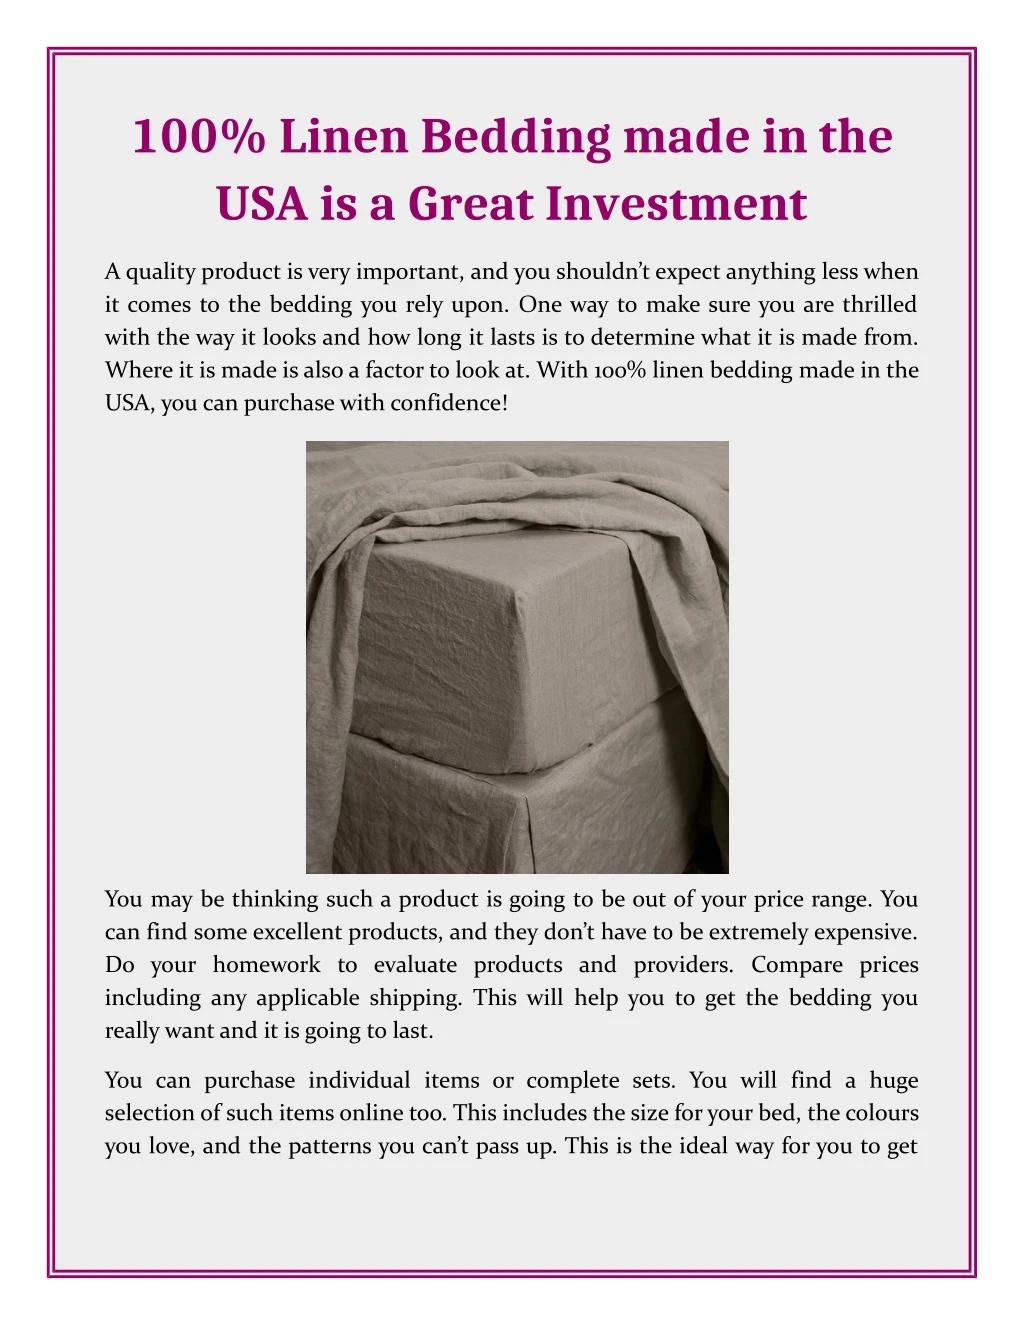 100 linen bedding made in the usa is a great